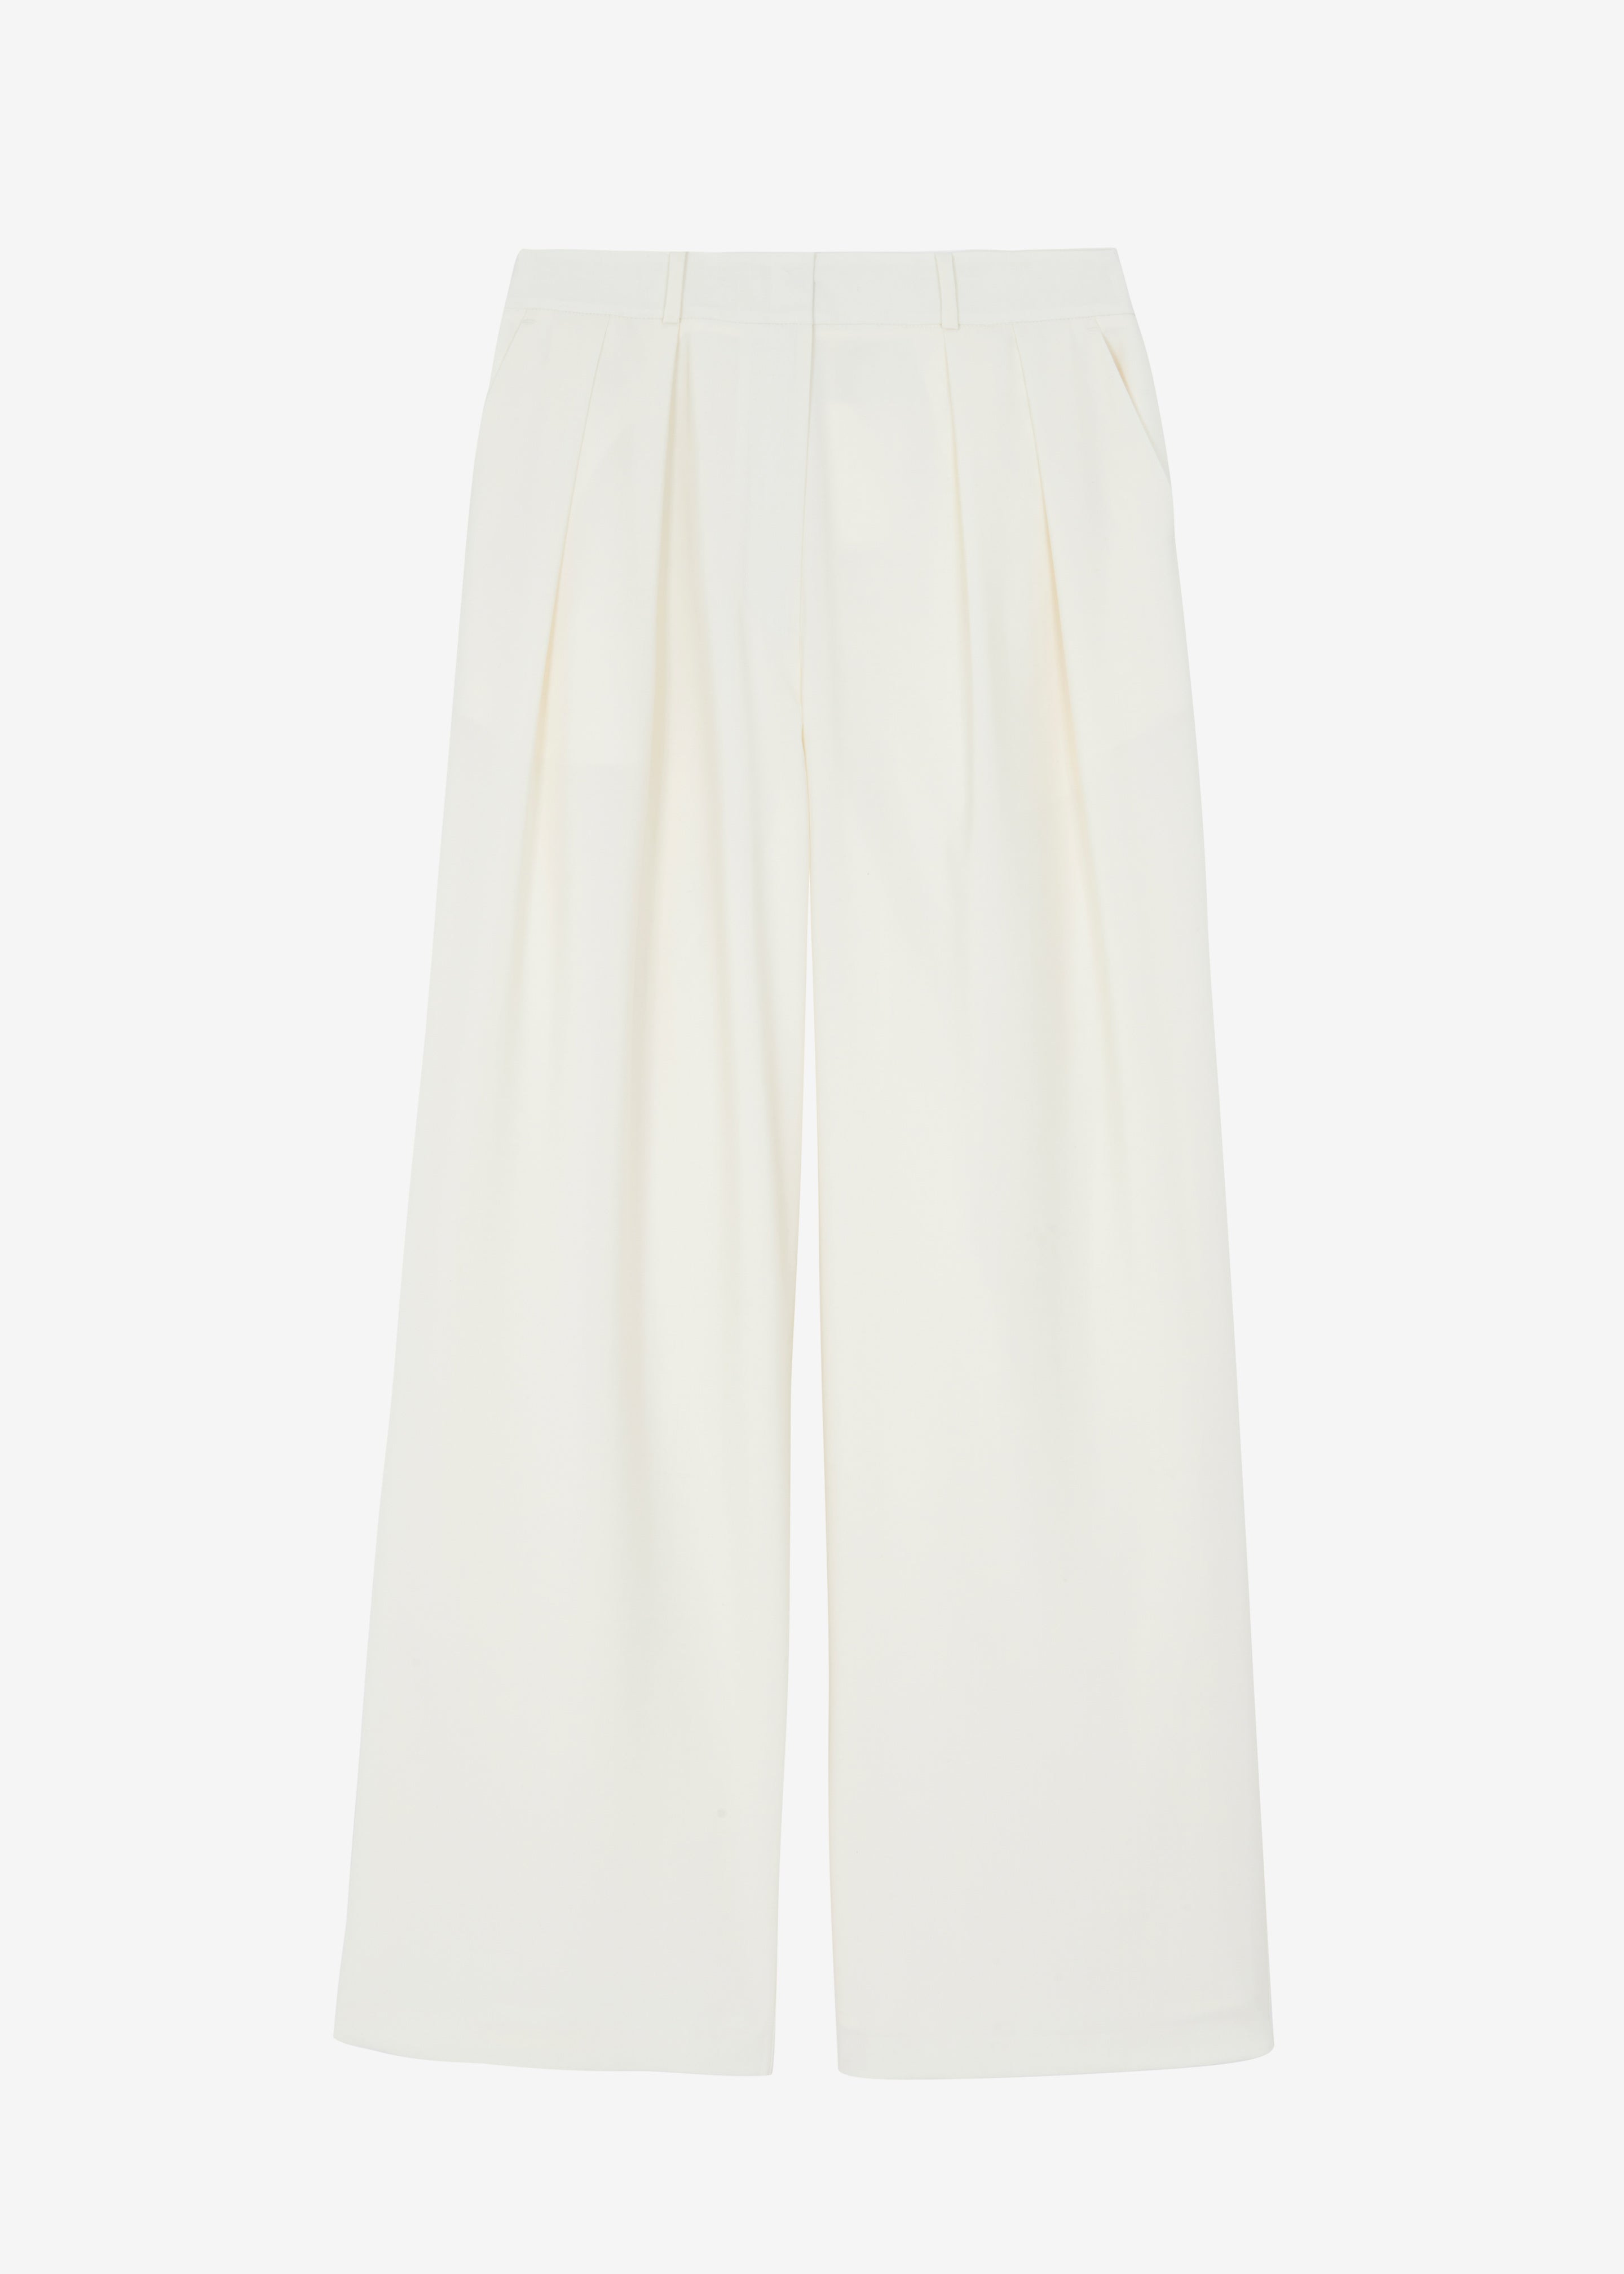 Ripley Pleated Trousers - Ivory - 7